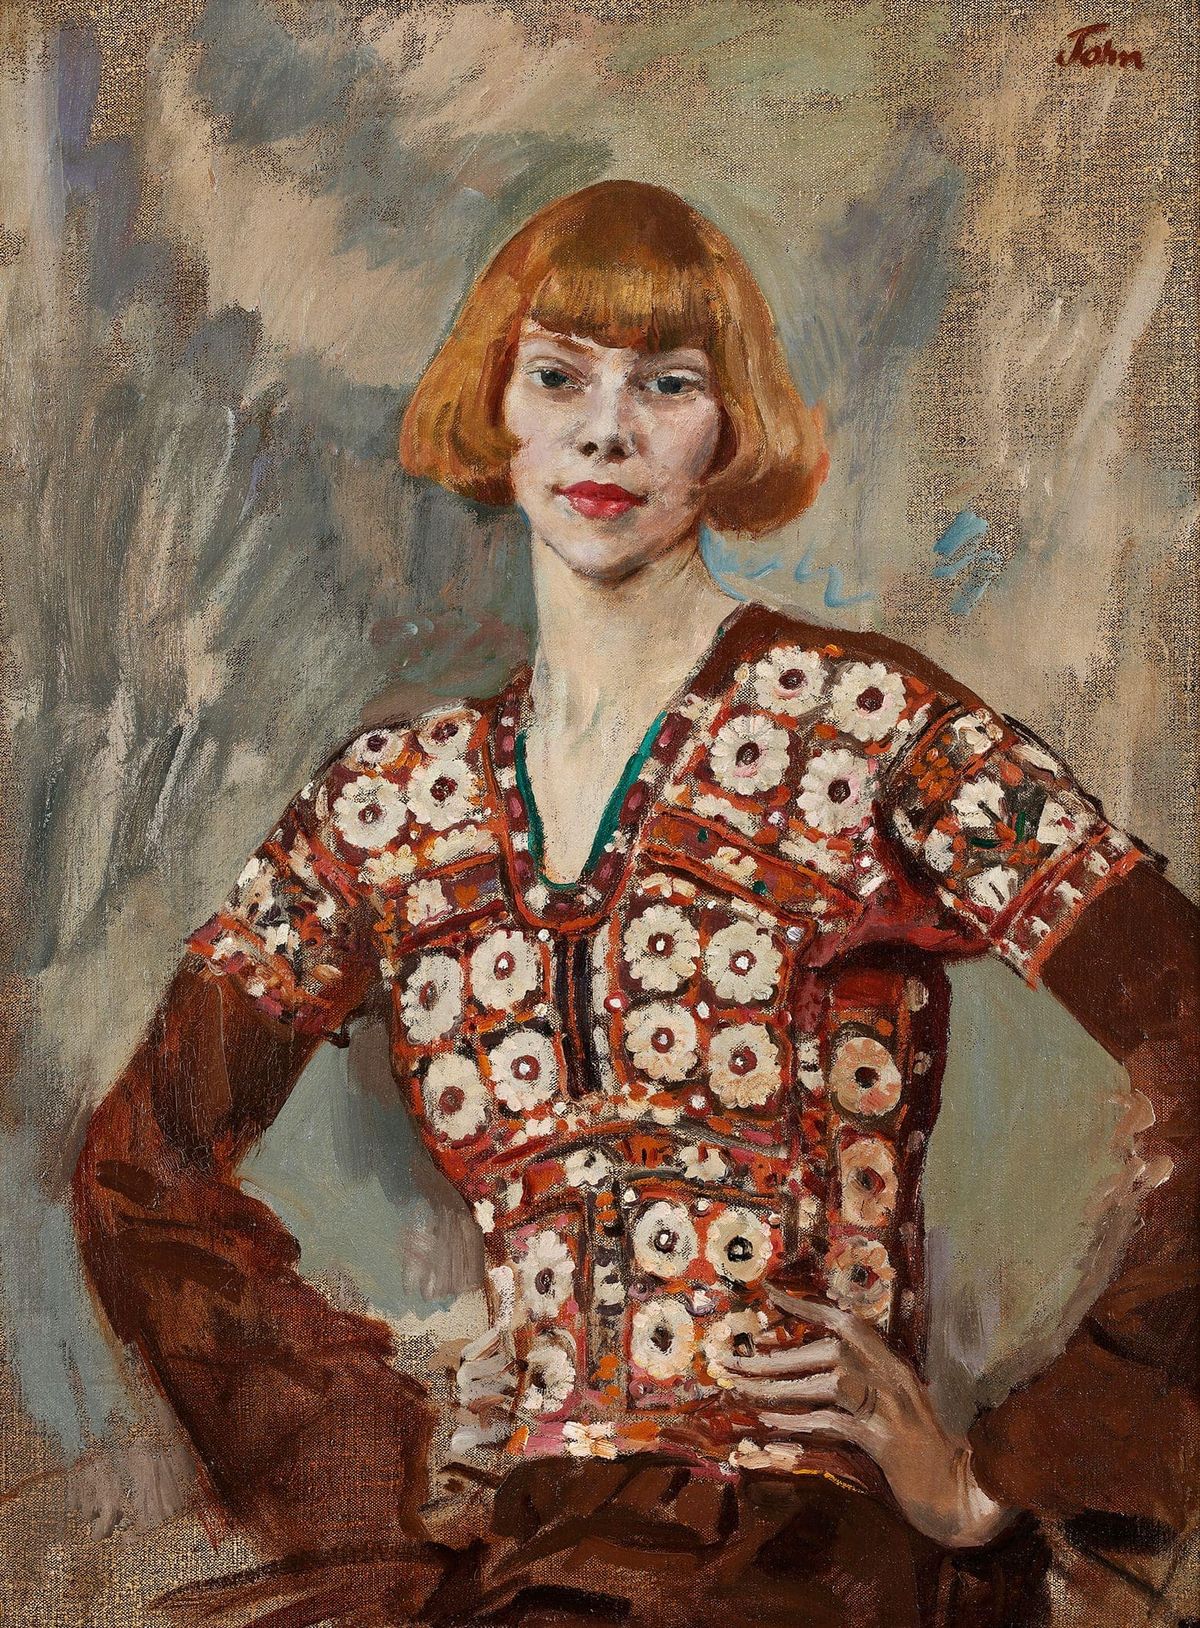 Augustus John's portrait of the poet, actress and artist's model Iris Beerbohm Tree (1920), from Phillip Mould Courtesy of Phillip Mould